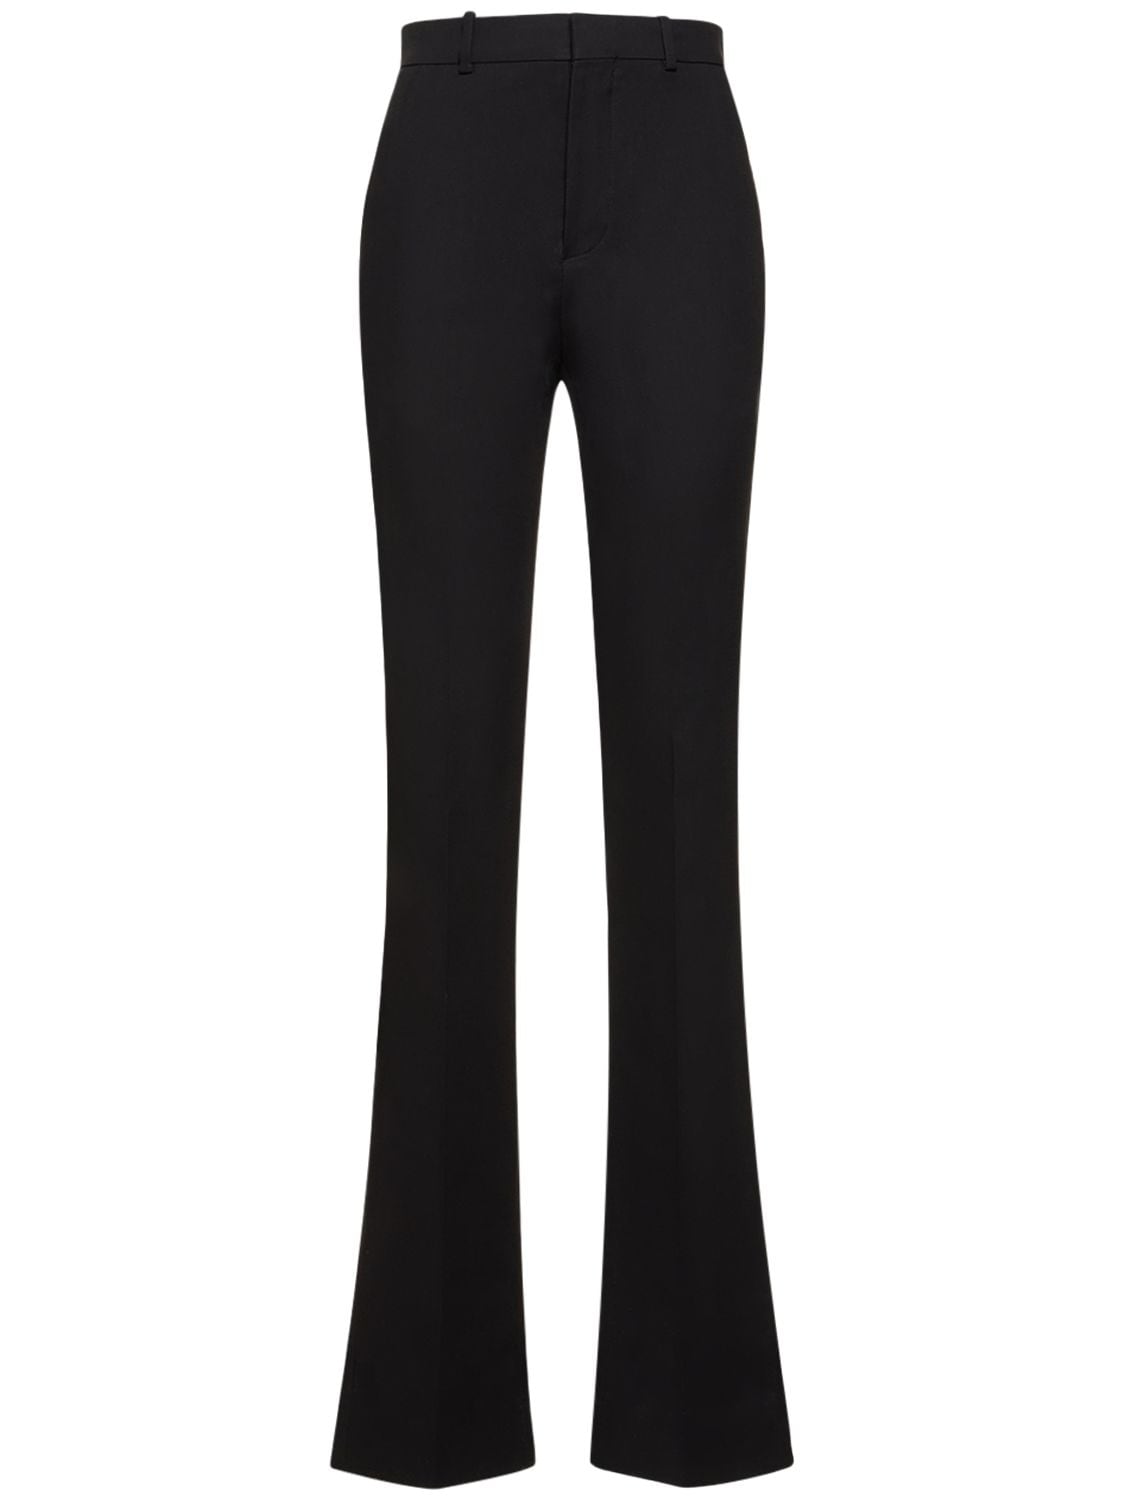 Ann Demeulemeester Laurence Fitted Stretch Cotton Pants In Black